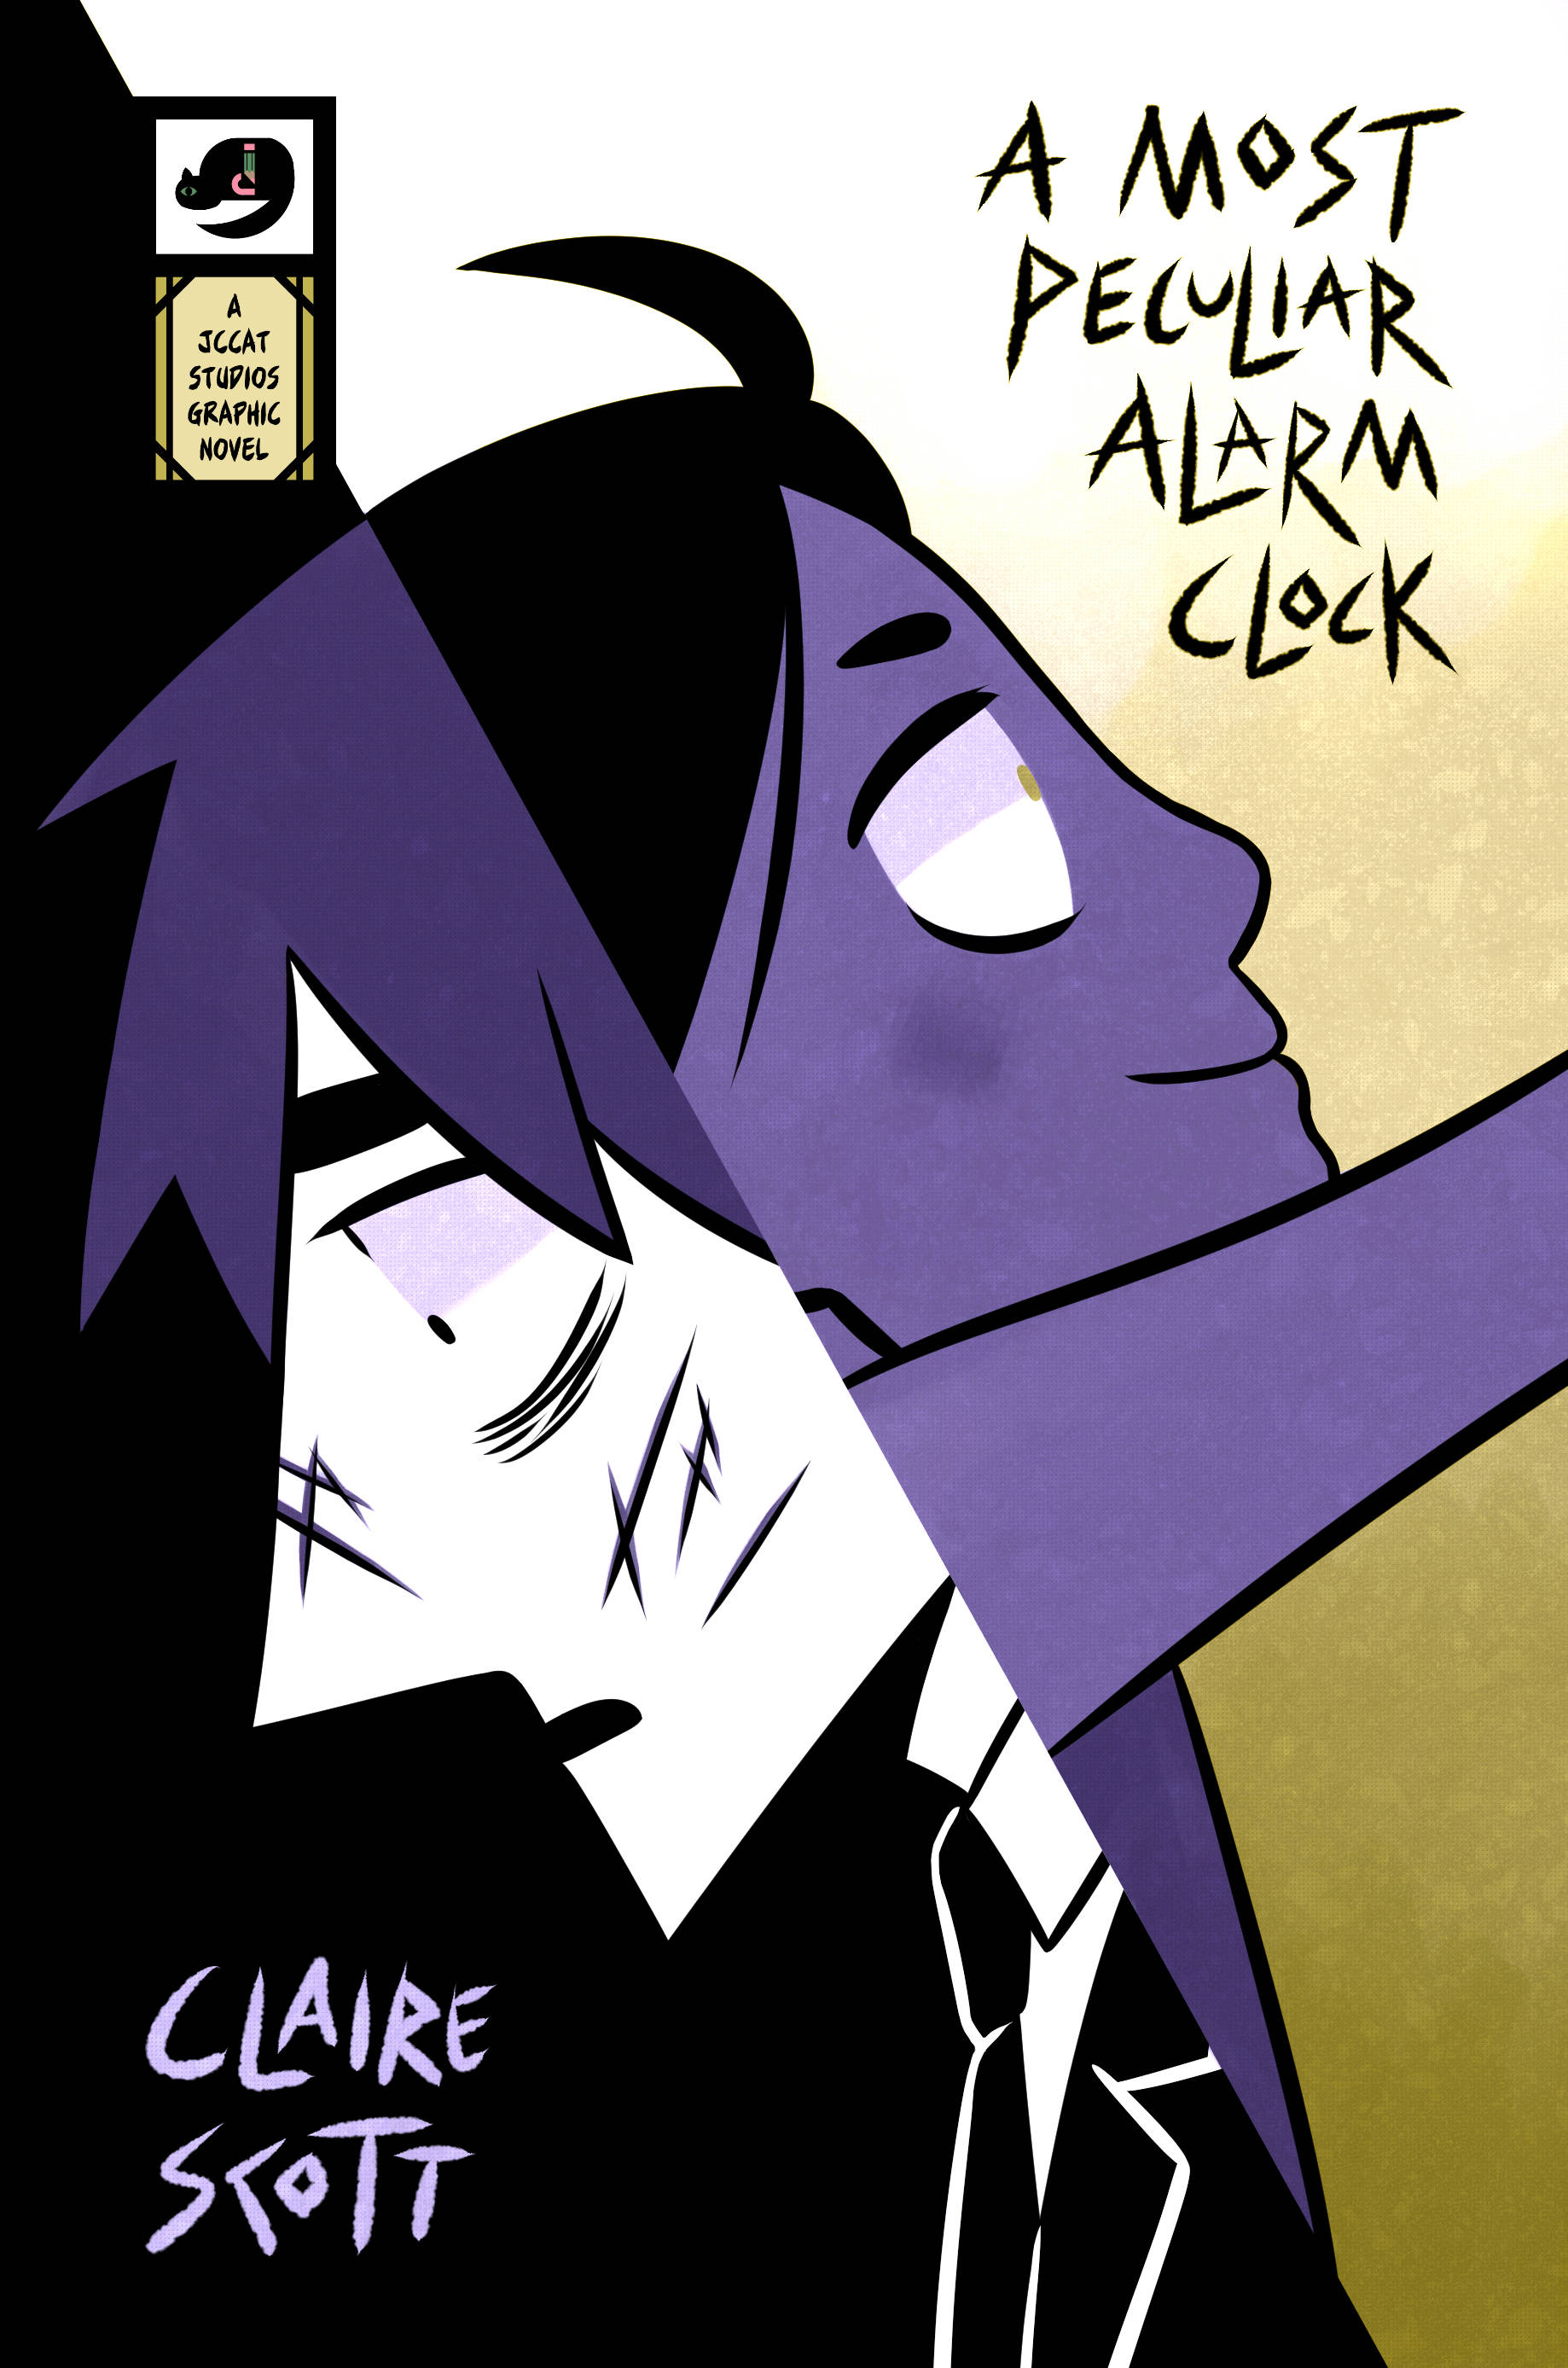 “A Most Peculiar Alarm Clock,” a new graphic novel by Claire Scott, tells the story of an unlucky man that comes into possession of the titular alarm clock. Scott said a classic “Twilight Zone” segment influence the story. (Courtesy Photo | Claire Scott)